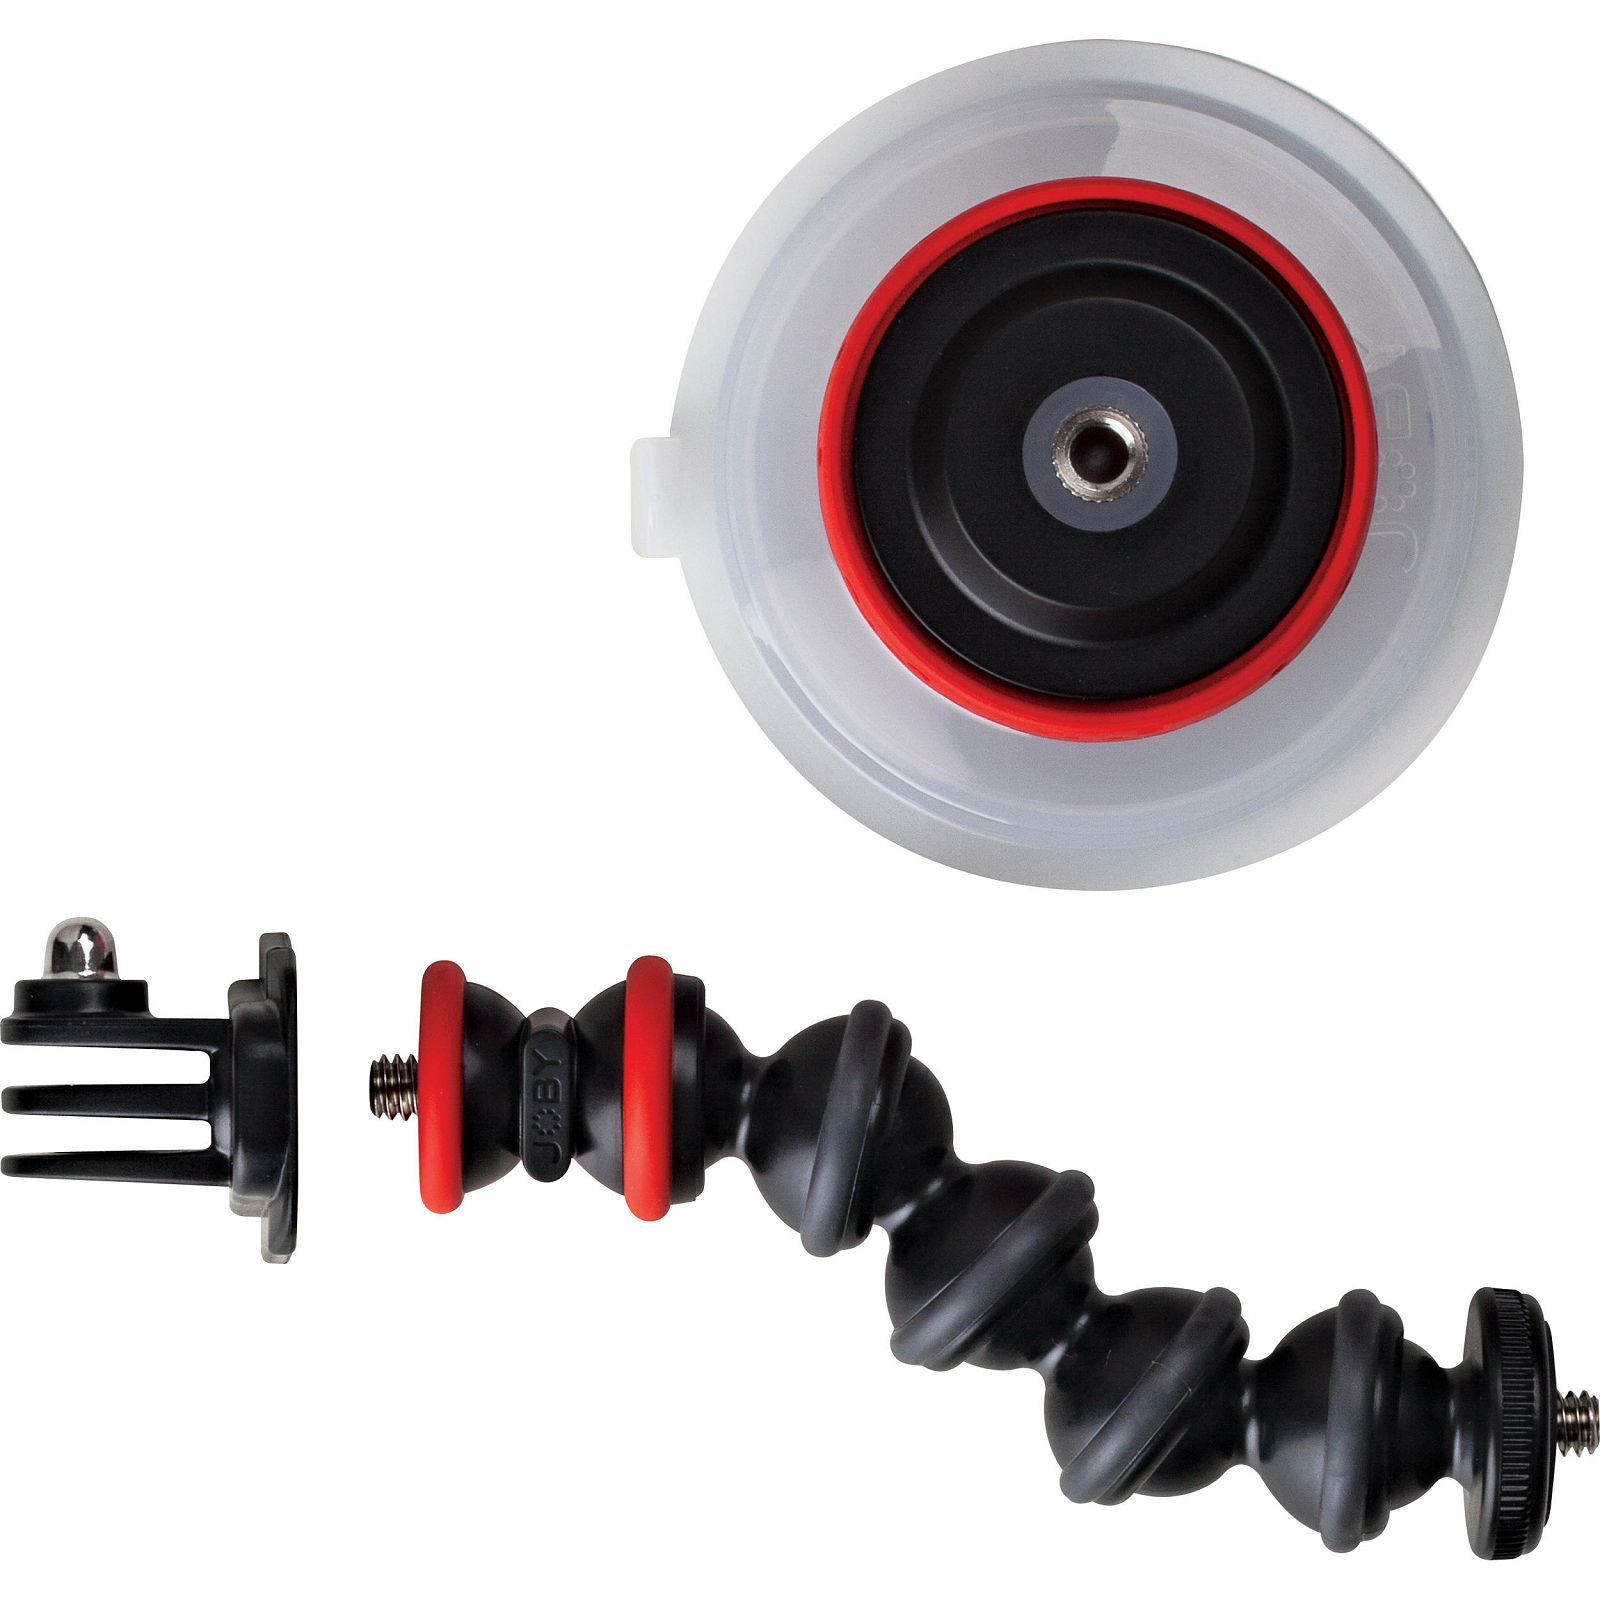 Joby Suction Cup & GorillaPod Arm Black Red